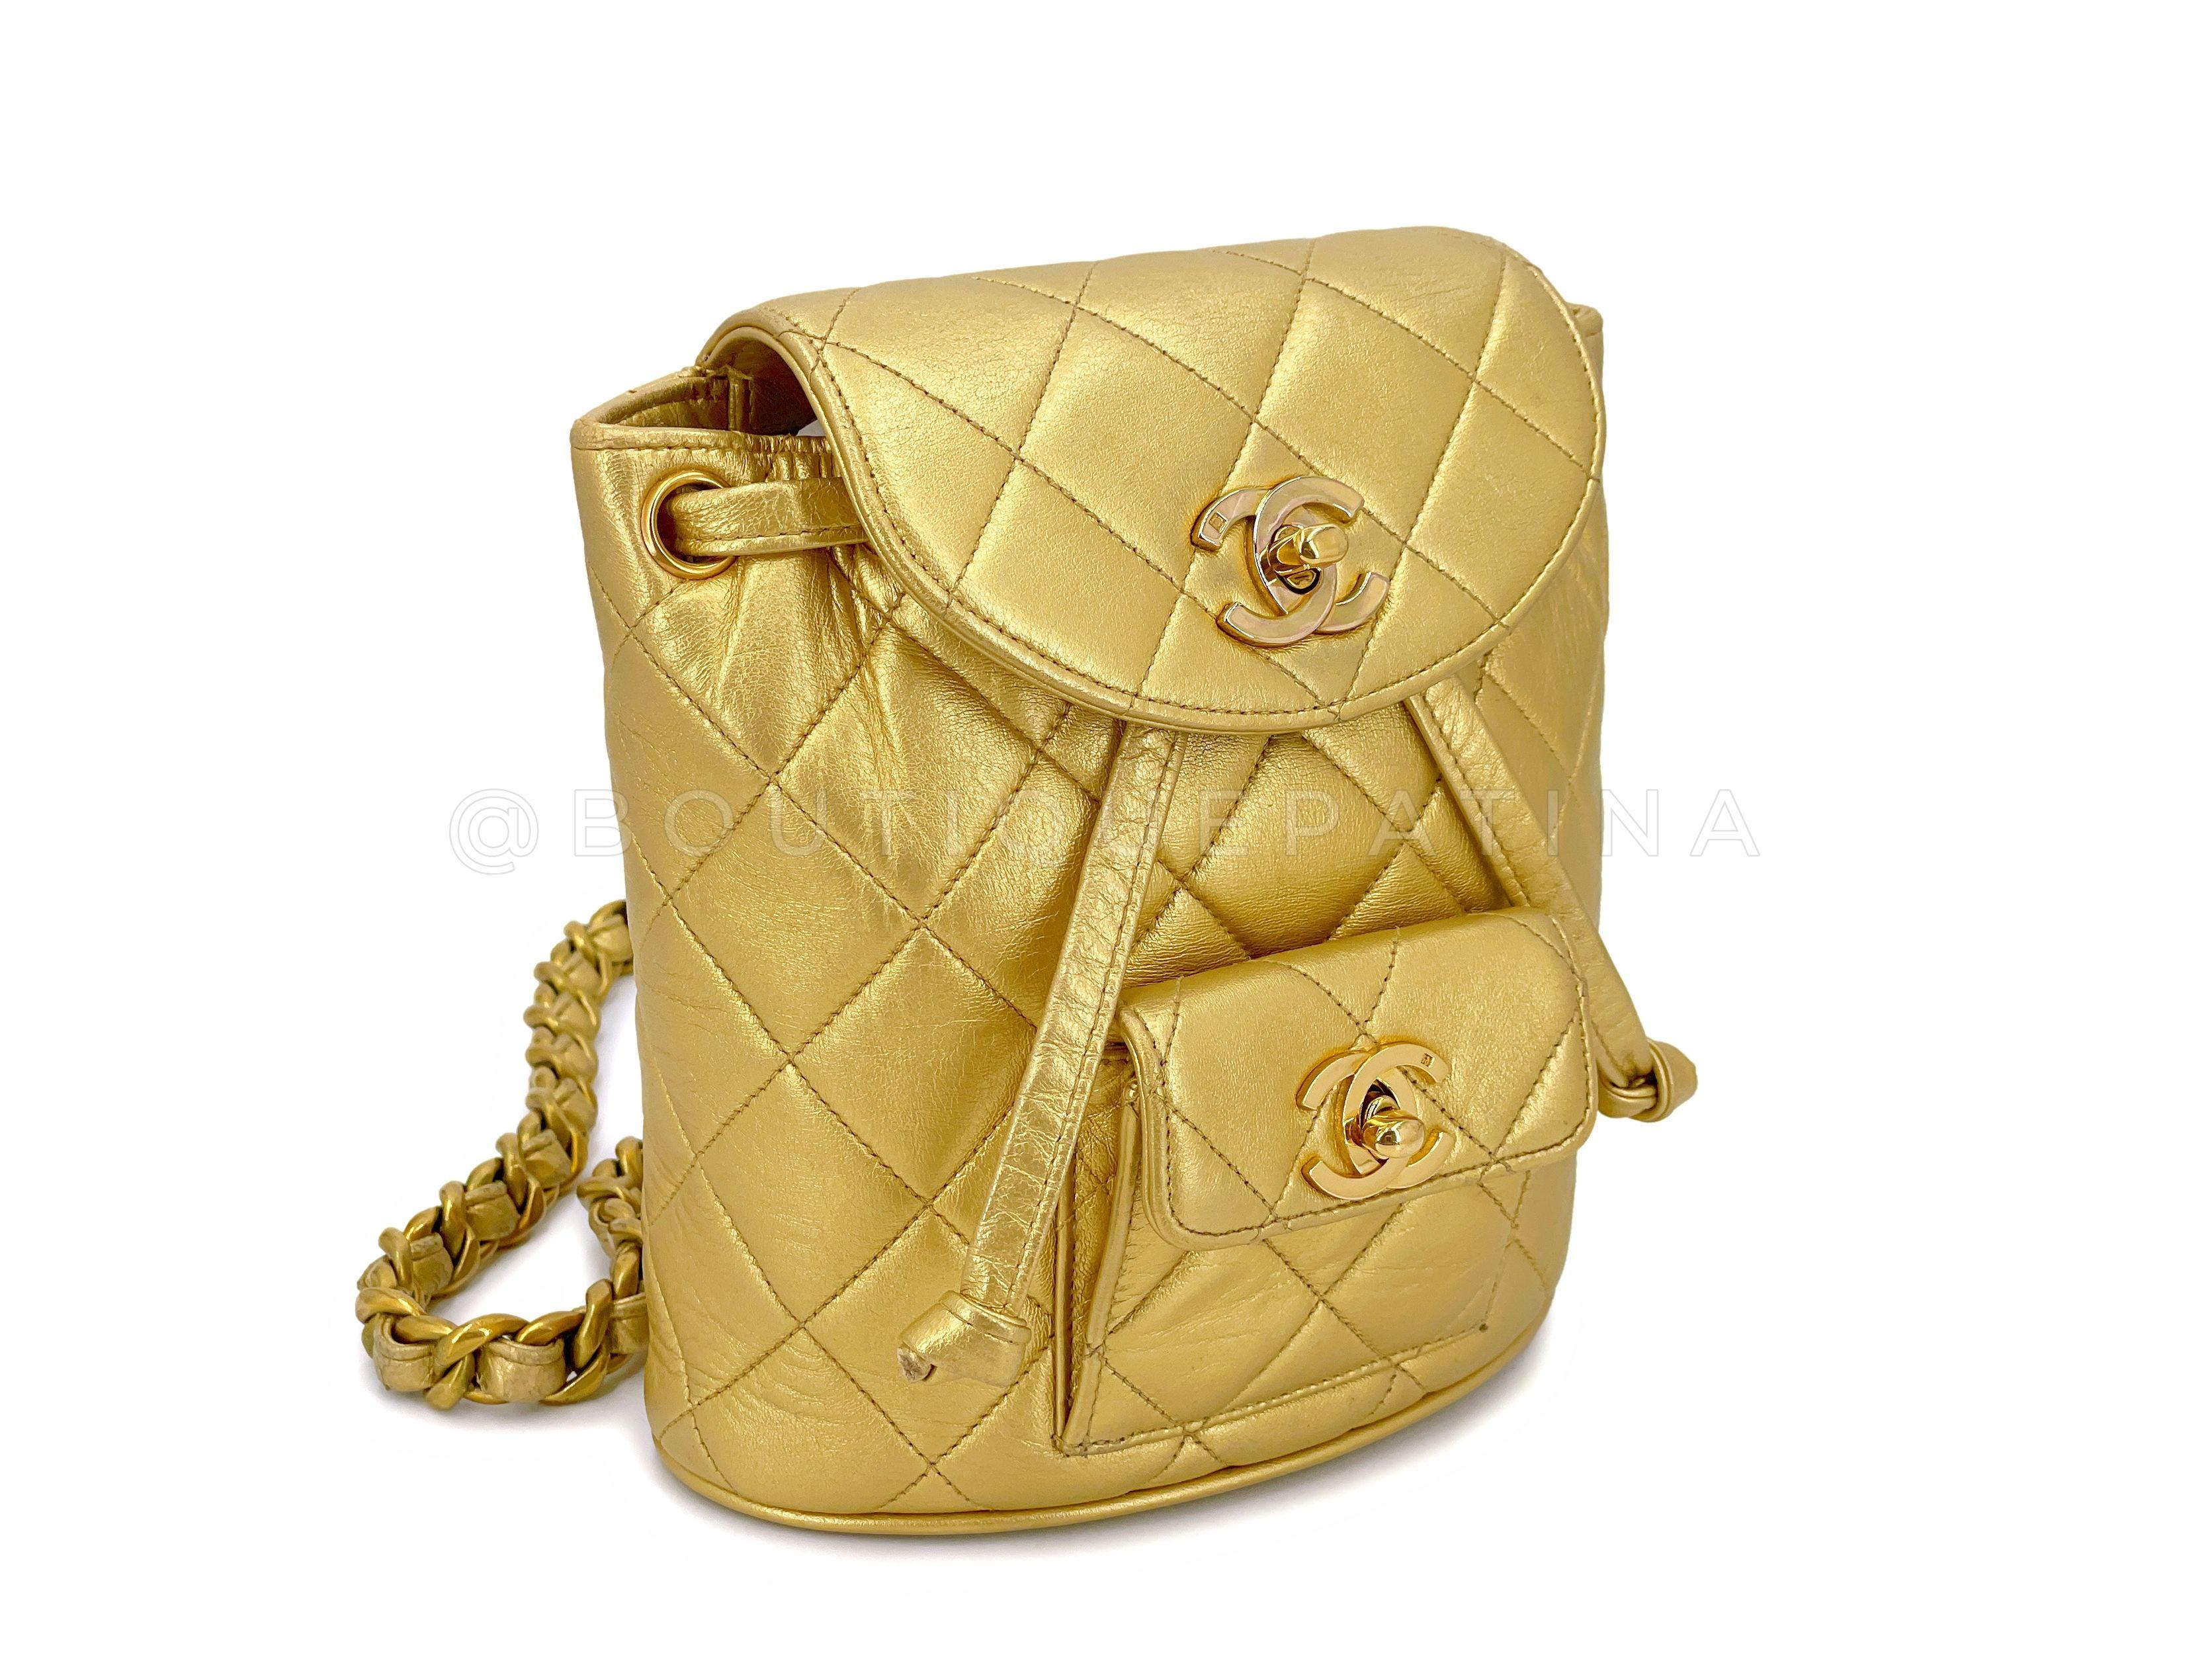 Chanel 1994 Gold Mini Duma Small Backpack Bag 24k GHW 67148 In Excellent Condition For Sale In Costa Mesa, CA